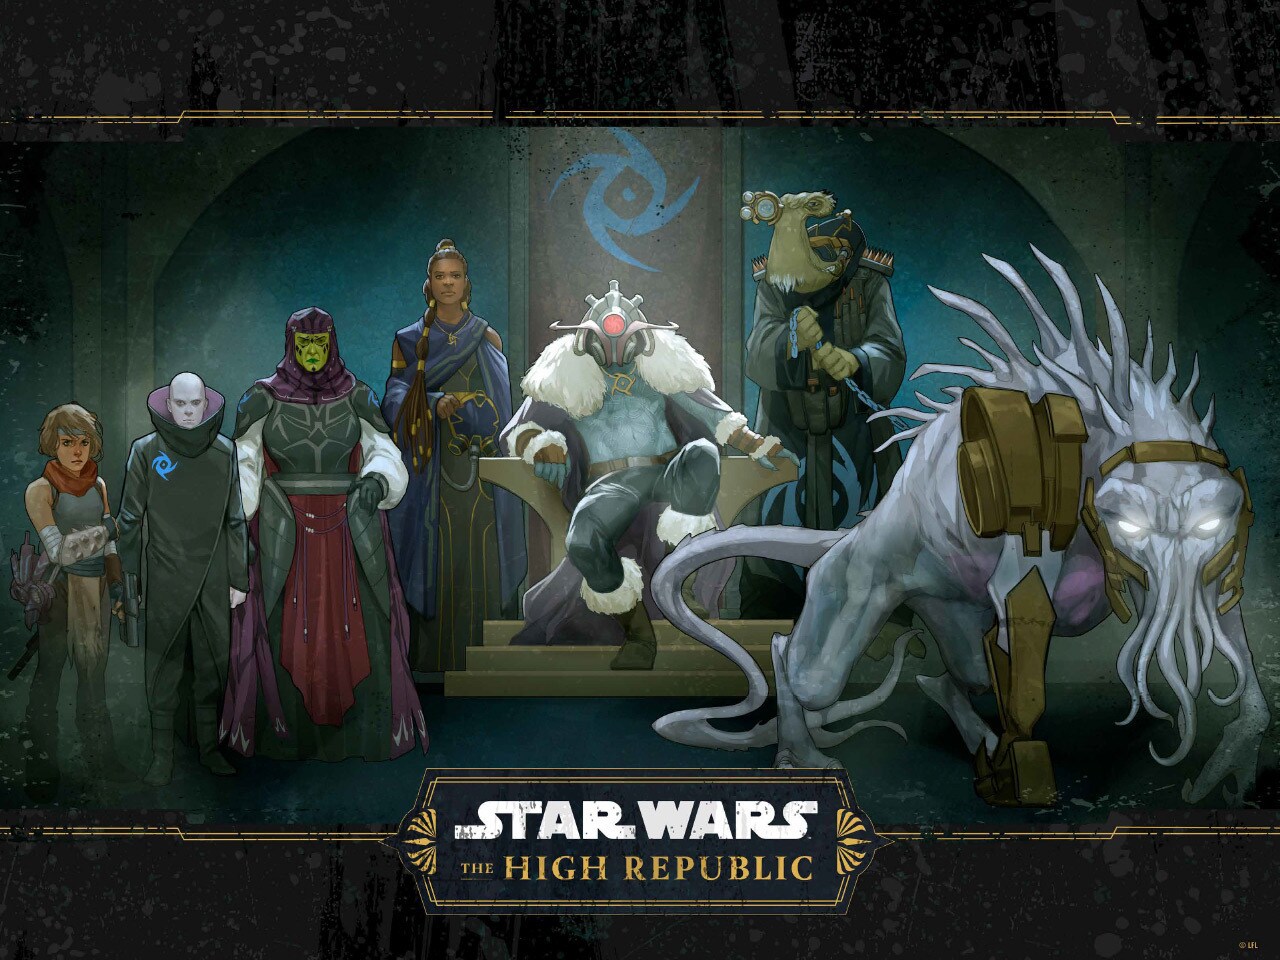 Star Wars: The High Republic poster featuring various characters